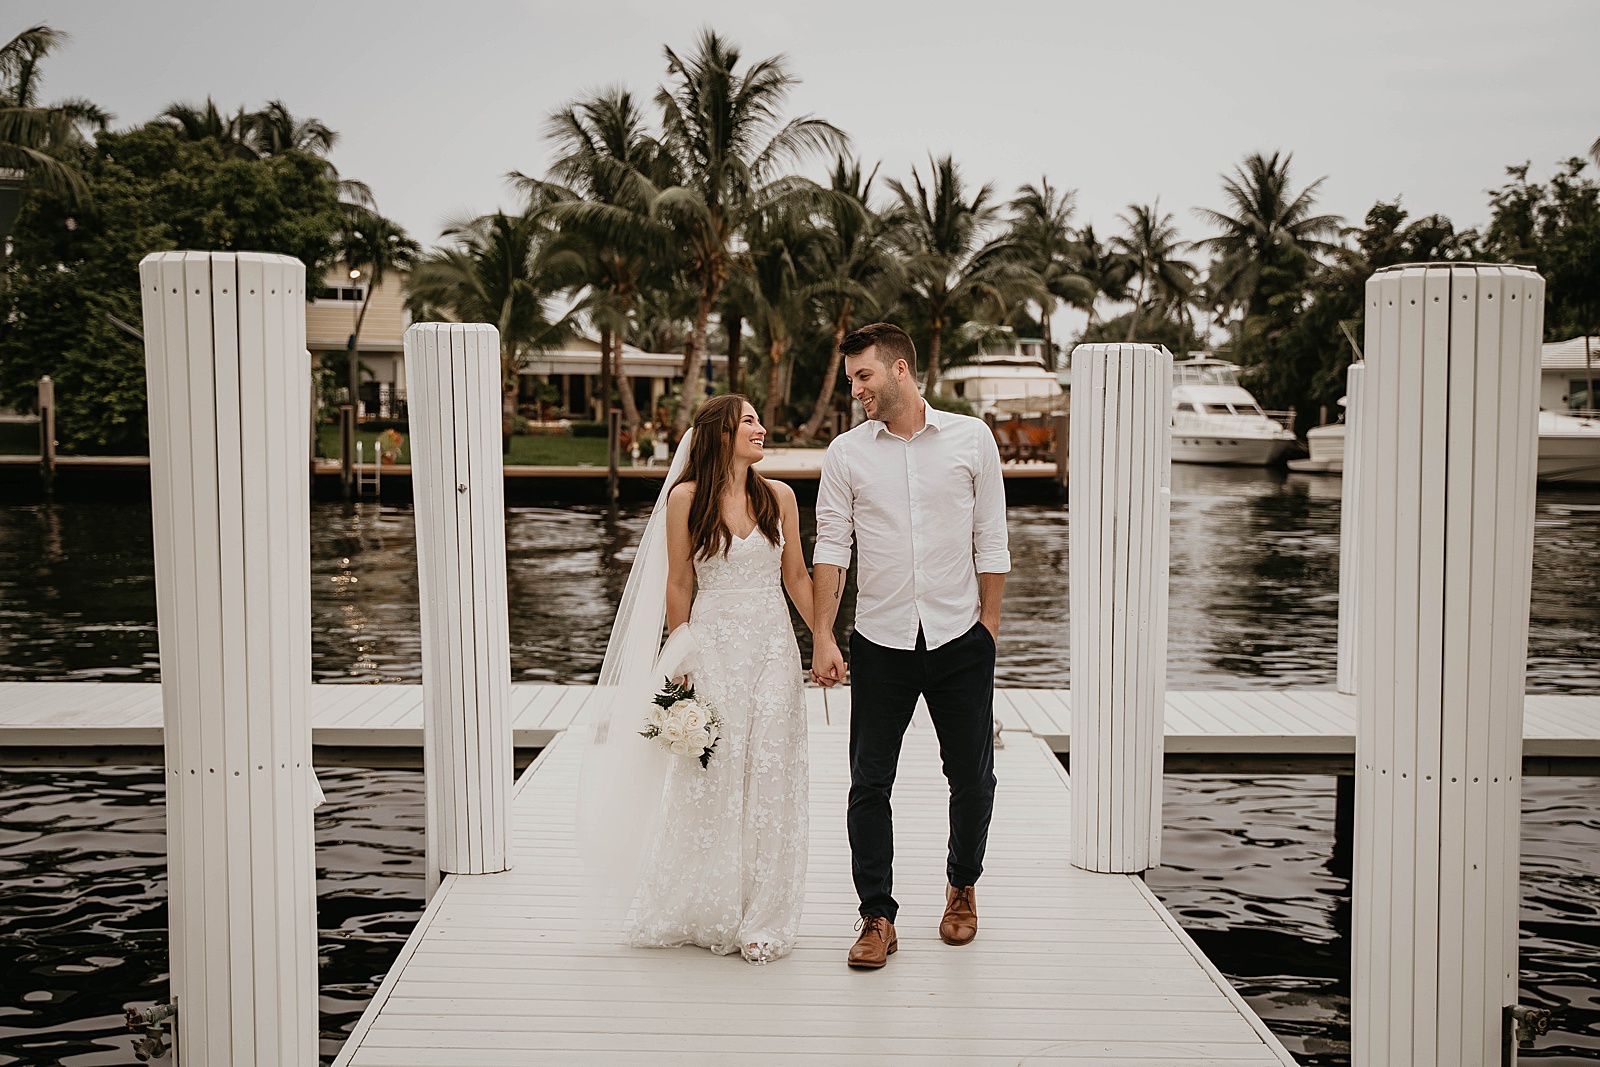 Intimate Fort Lauderdale Elopement captured by South Florida Elopement Photographer, Krystal Capone Photography